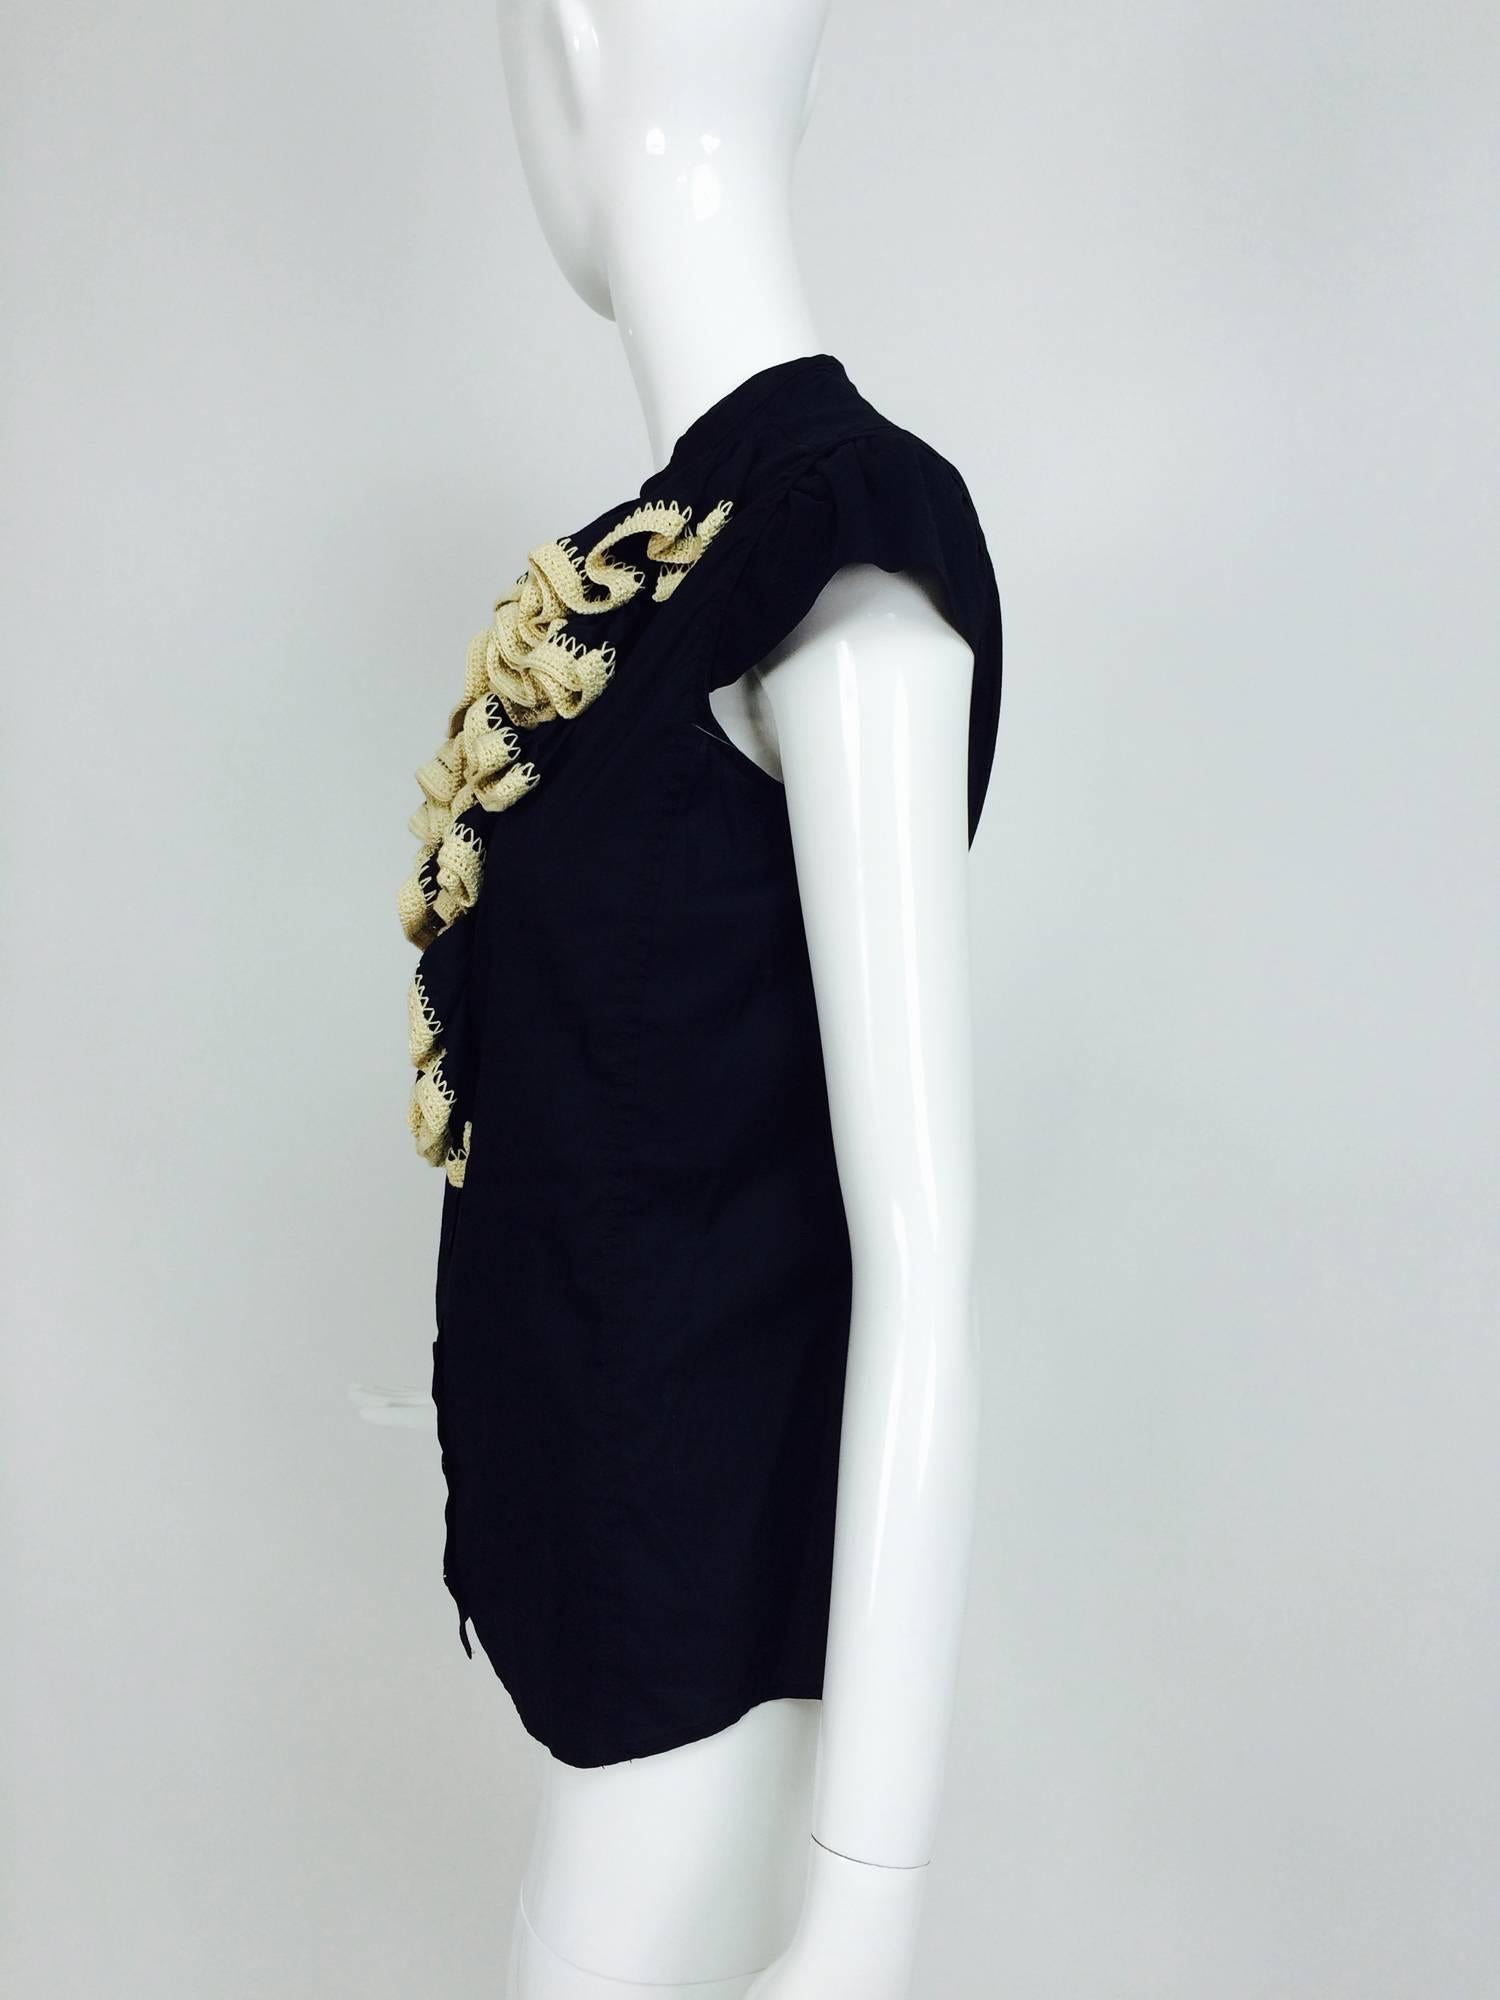 Yves Saint Laurent black polished cotton cap sleeve crochet ruffle front blouse...Silky cotton blouse with a banded collar, the bodice features rows of ruffles each trimmed with a band of ecru cotton crochet...Cap sleeves, button front and princess